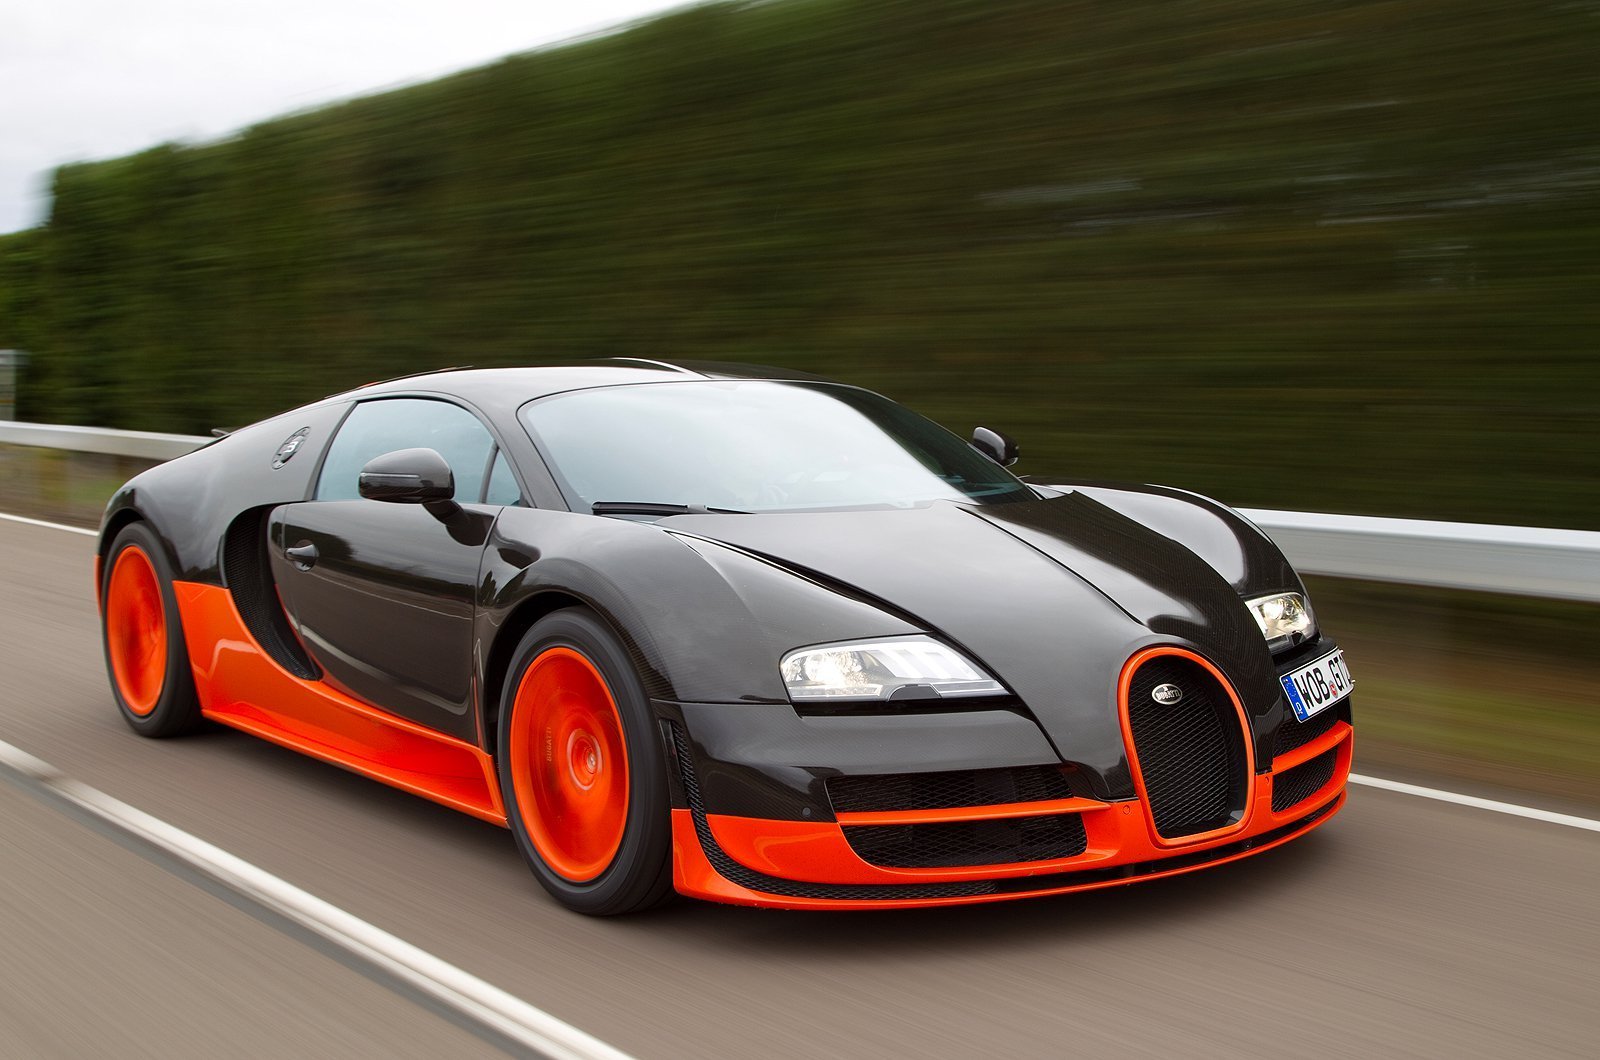 This List Of The World’s Top 10 Fastest Cars Will Get Your Adrenaline